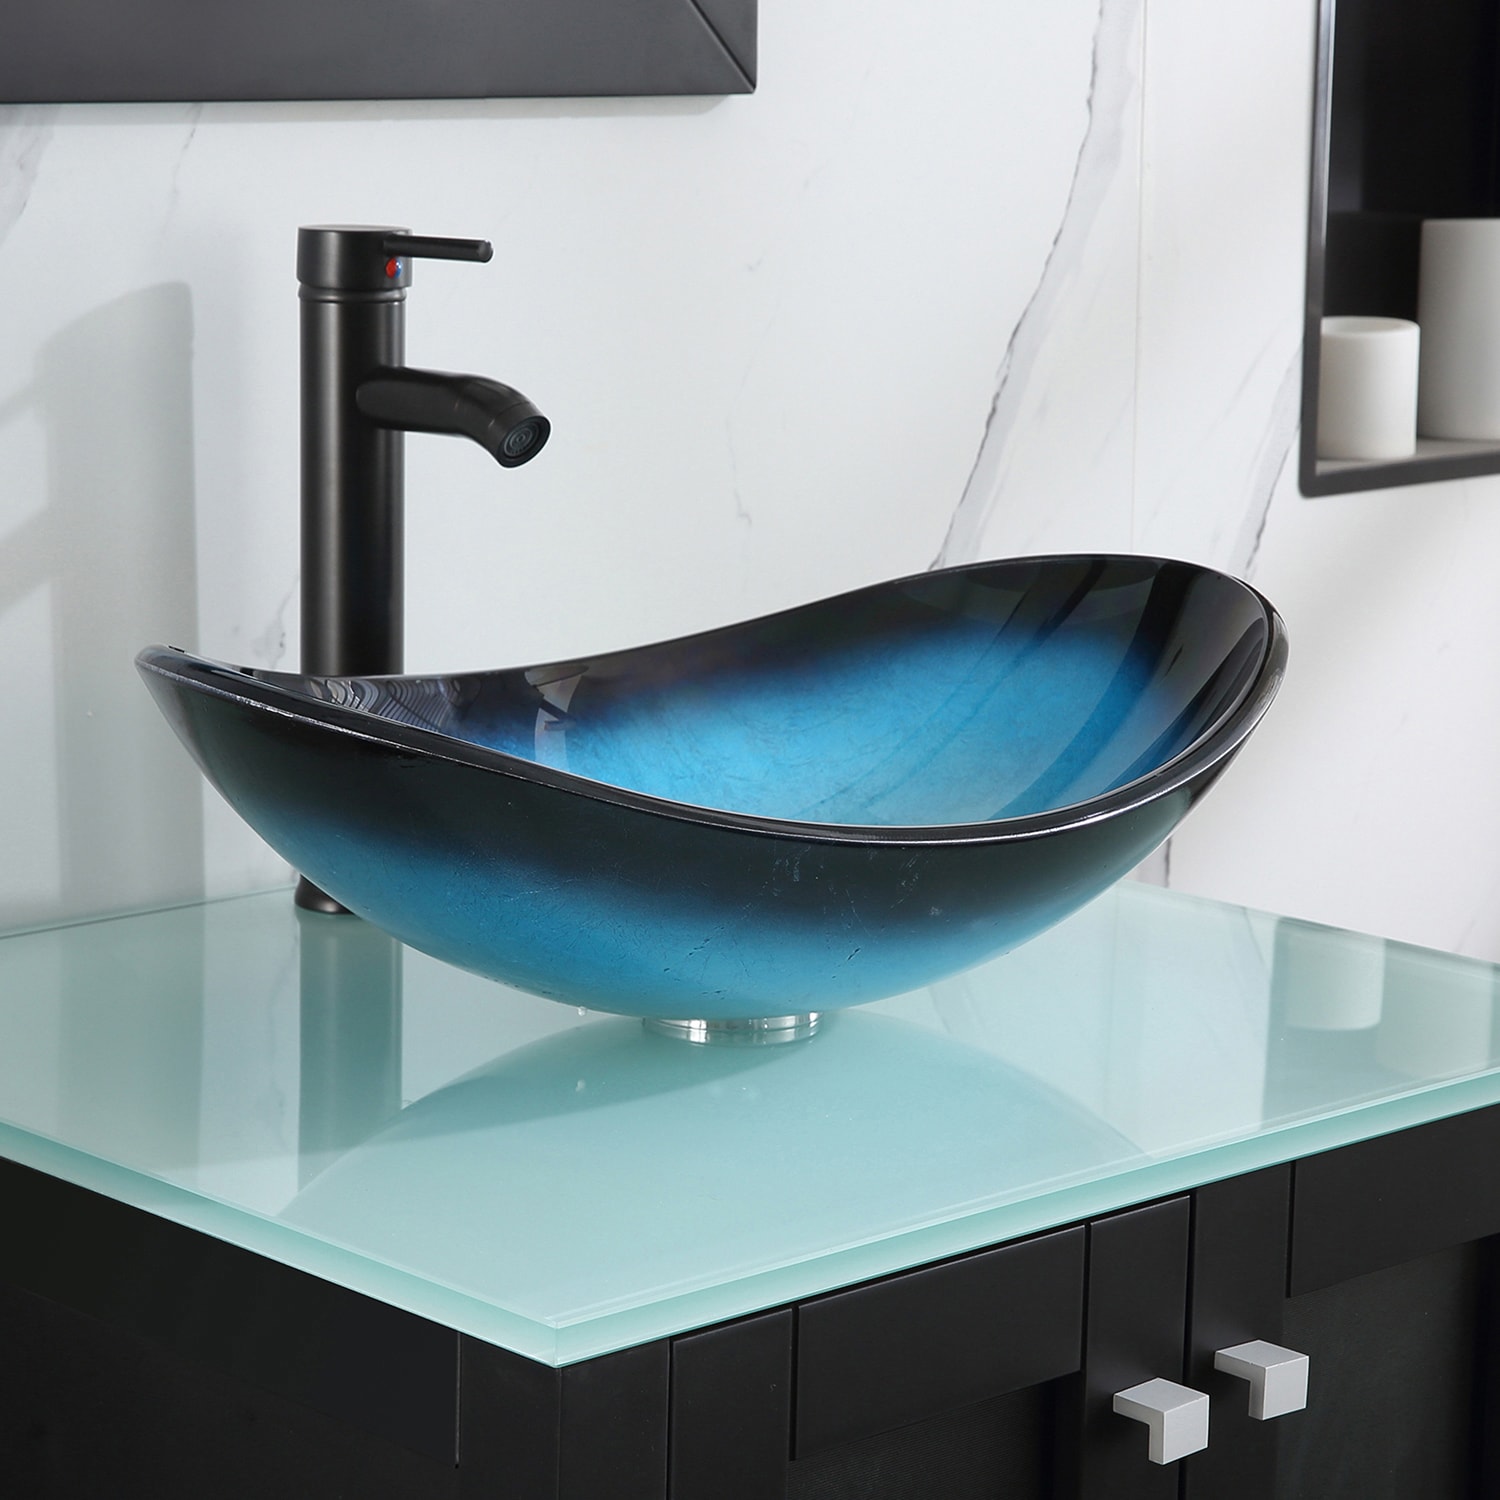 Wonline 36Inch Bathroom Vanity with Sink Combo Modern Black Cabinet Tempered Glass Vessel Sink Bowl Faucet Drain Combo, Size: 24.4, Blue